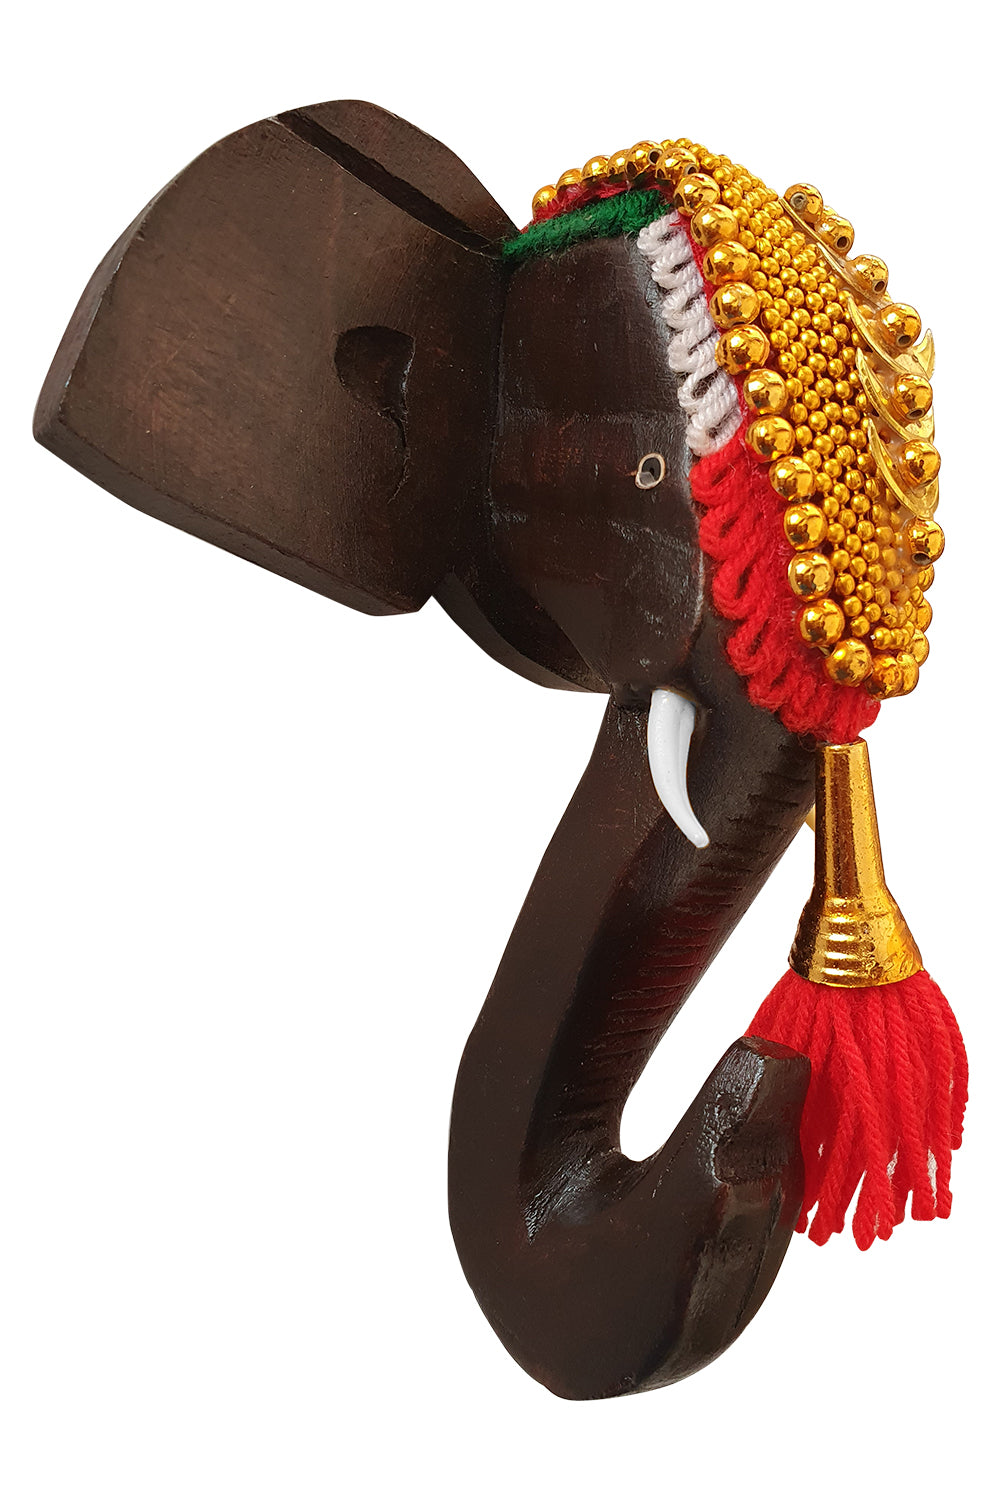 Southloom Handmade Temple Elephant Head Handicraft (Carved from Mahogany Wood) 6 Inches